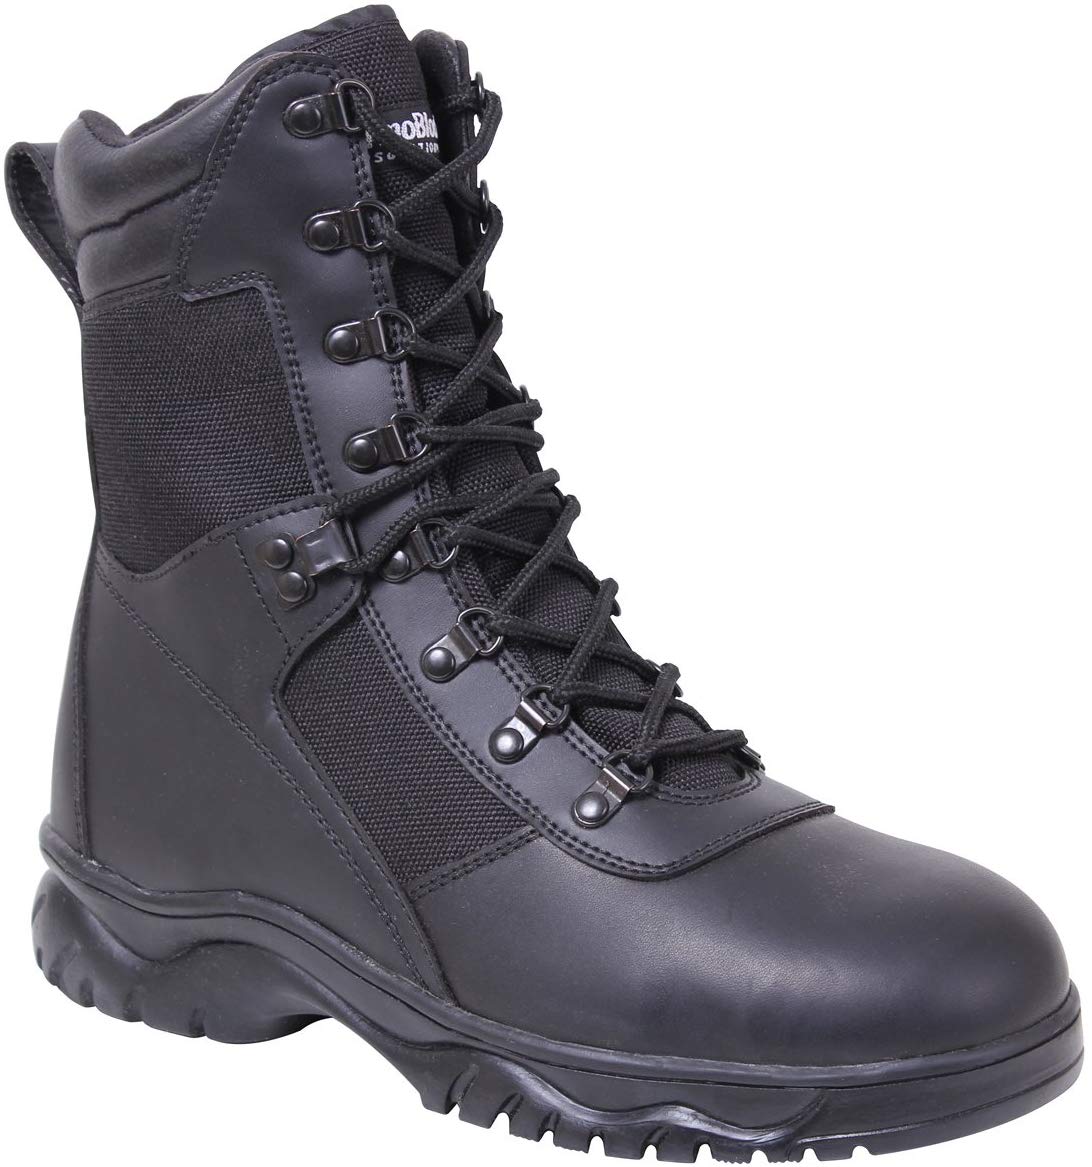 Rothco Insulated 8 Inch Side Zip Tactical Boots